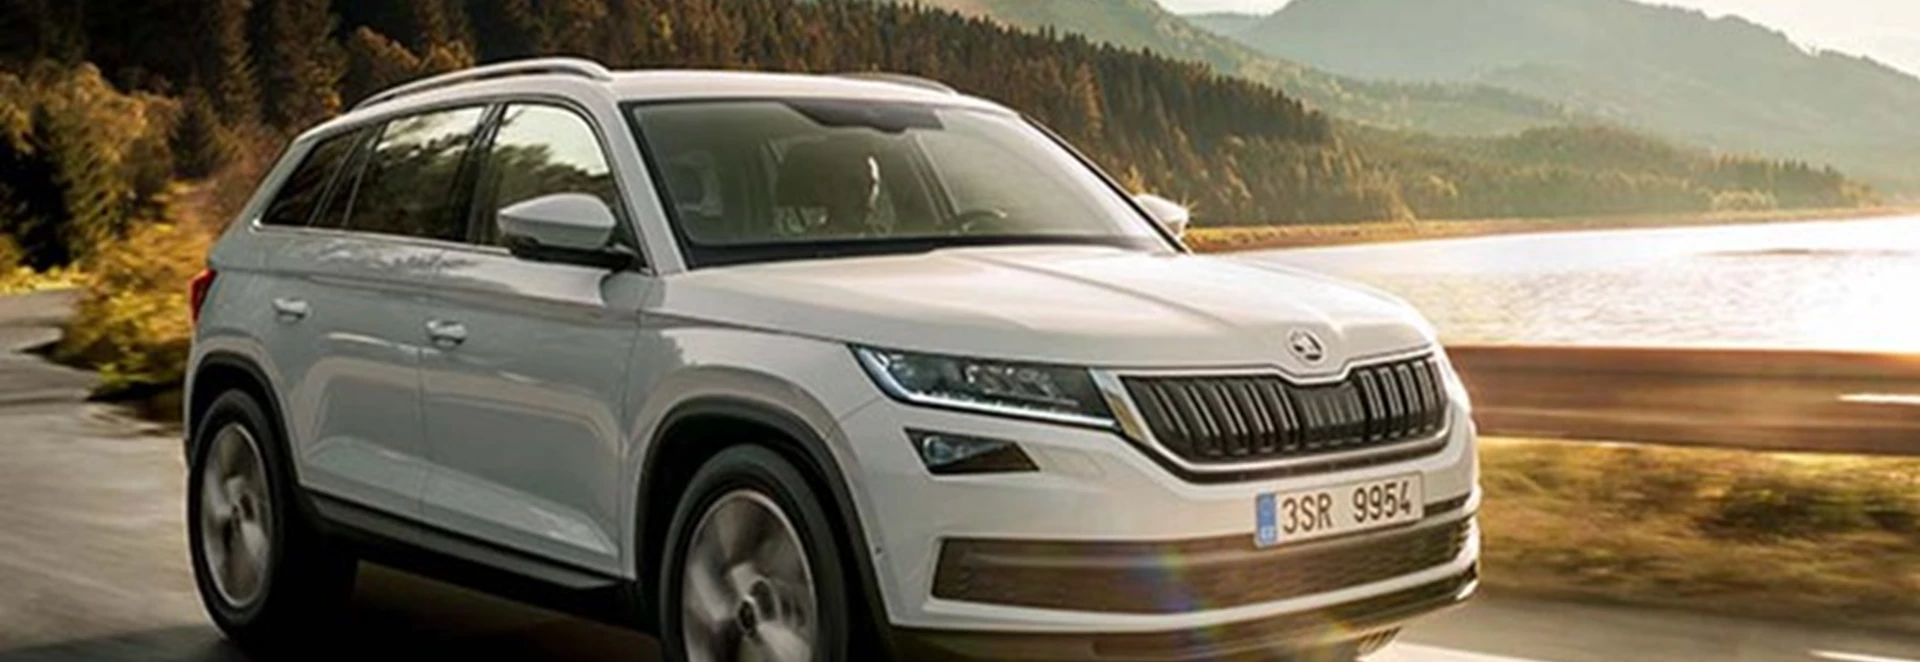 New Skoda Kodiaq SUV: First full pictures, pricing and specs